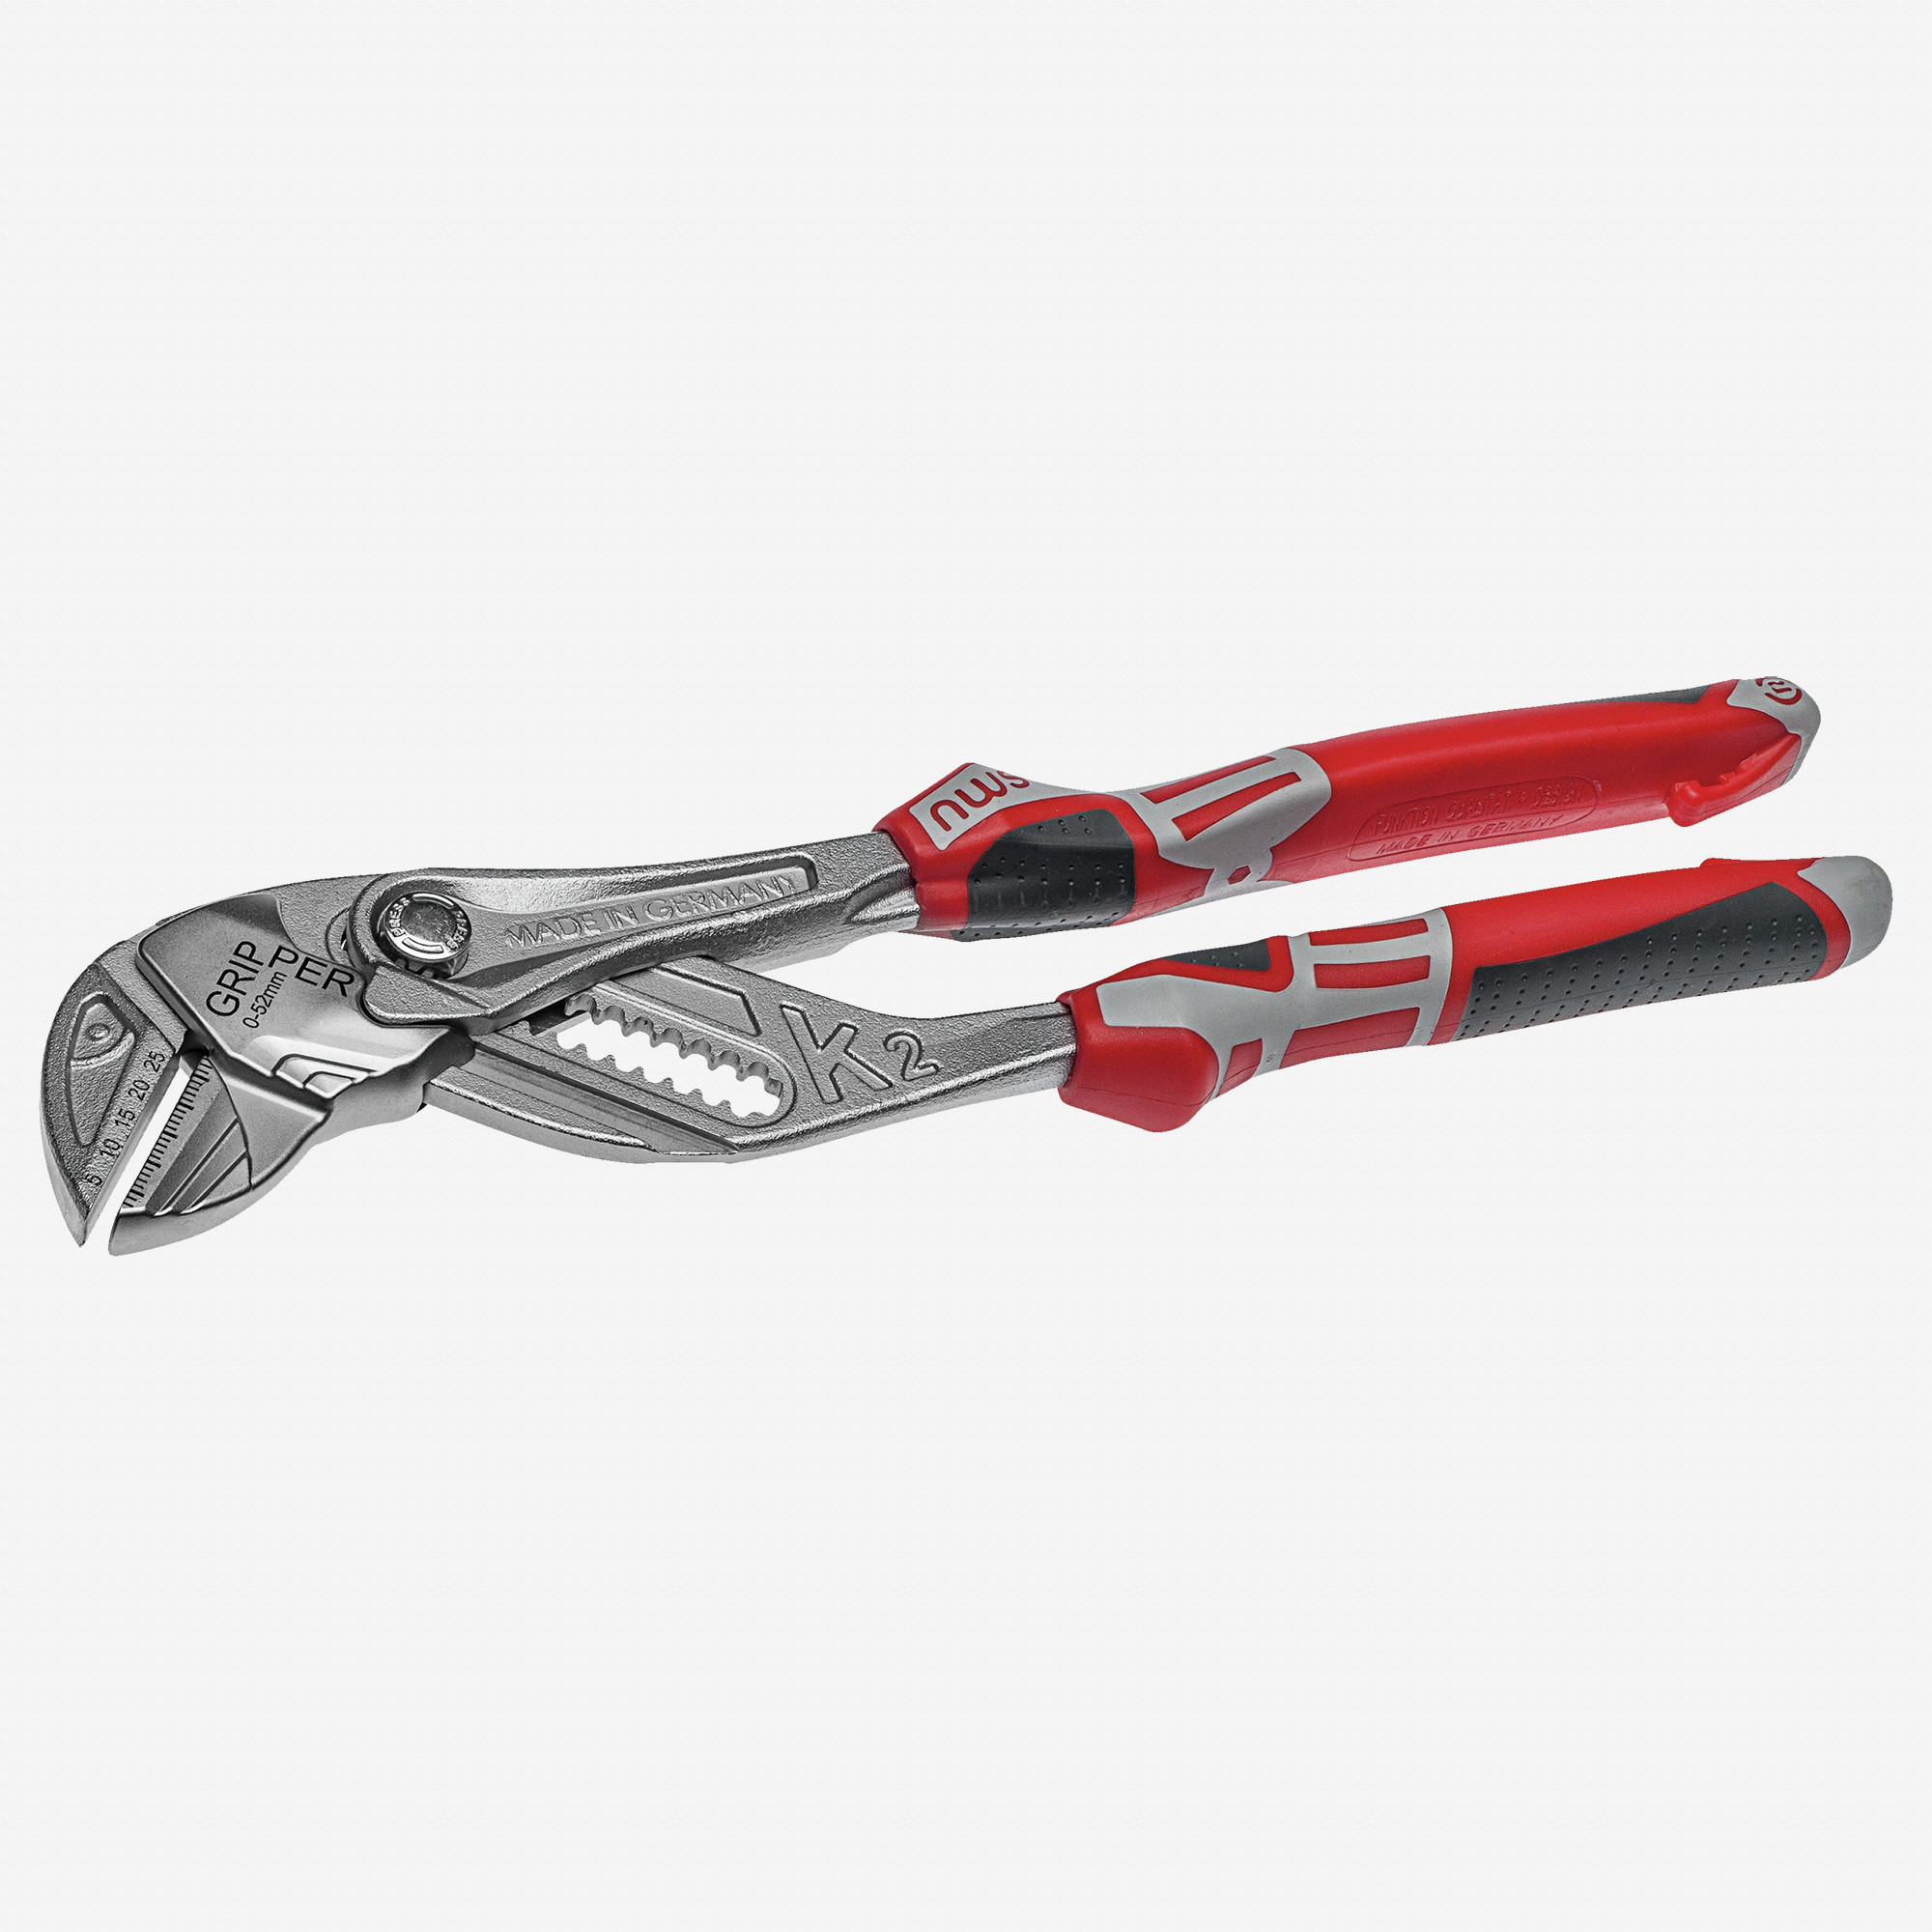 Kings County Tools Non-Marring Soft Jaw Needle Nose Pliers | 1.25 Jaw  Length | Won't Scratch Your Hardware